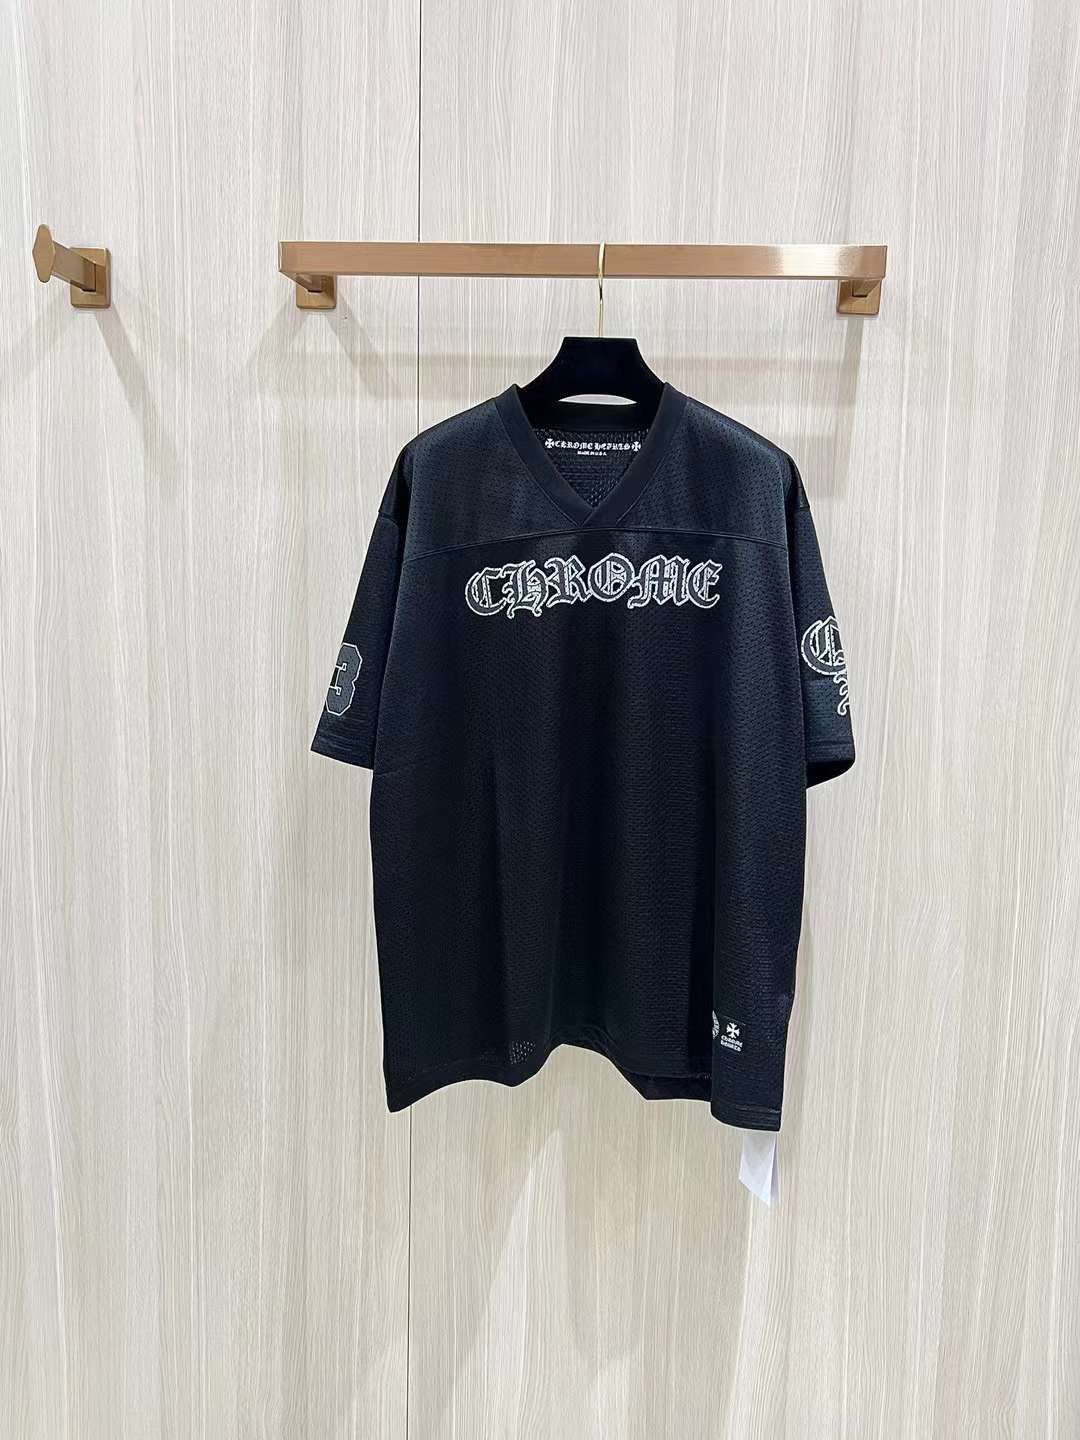 Chrome Hearts Stadium Warm up Ss Jersey in Black